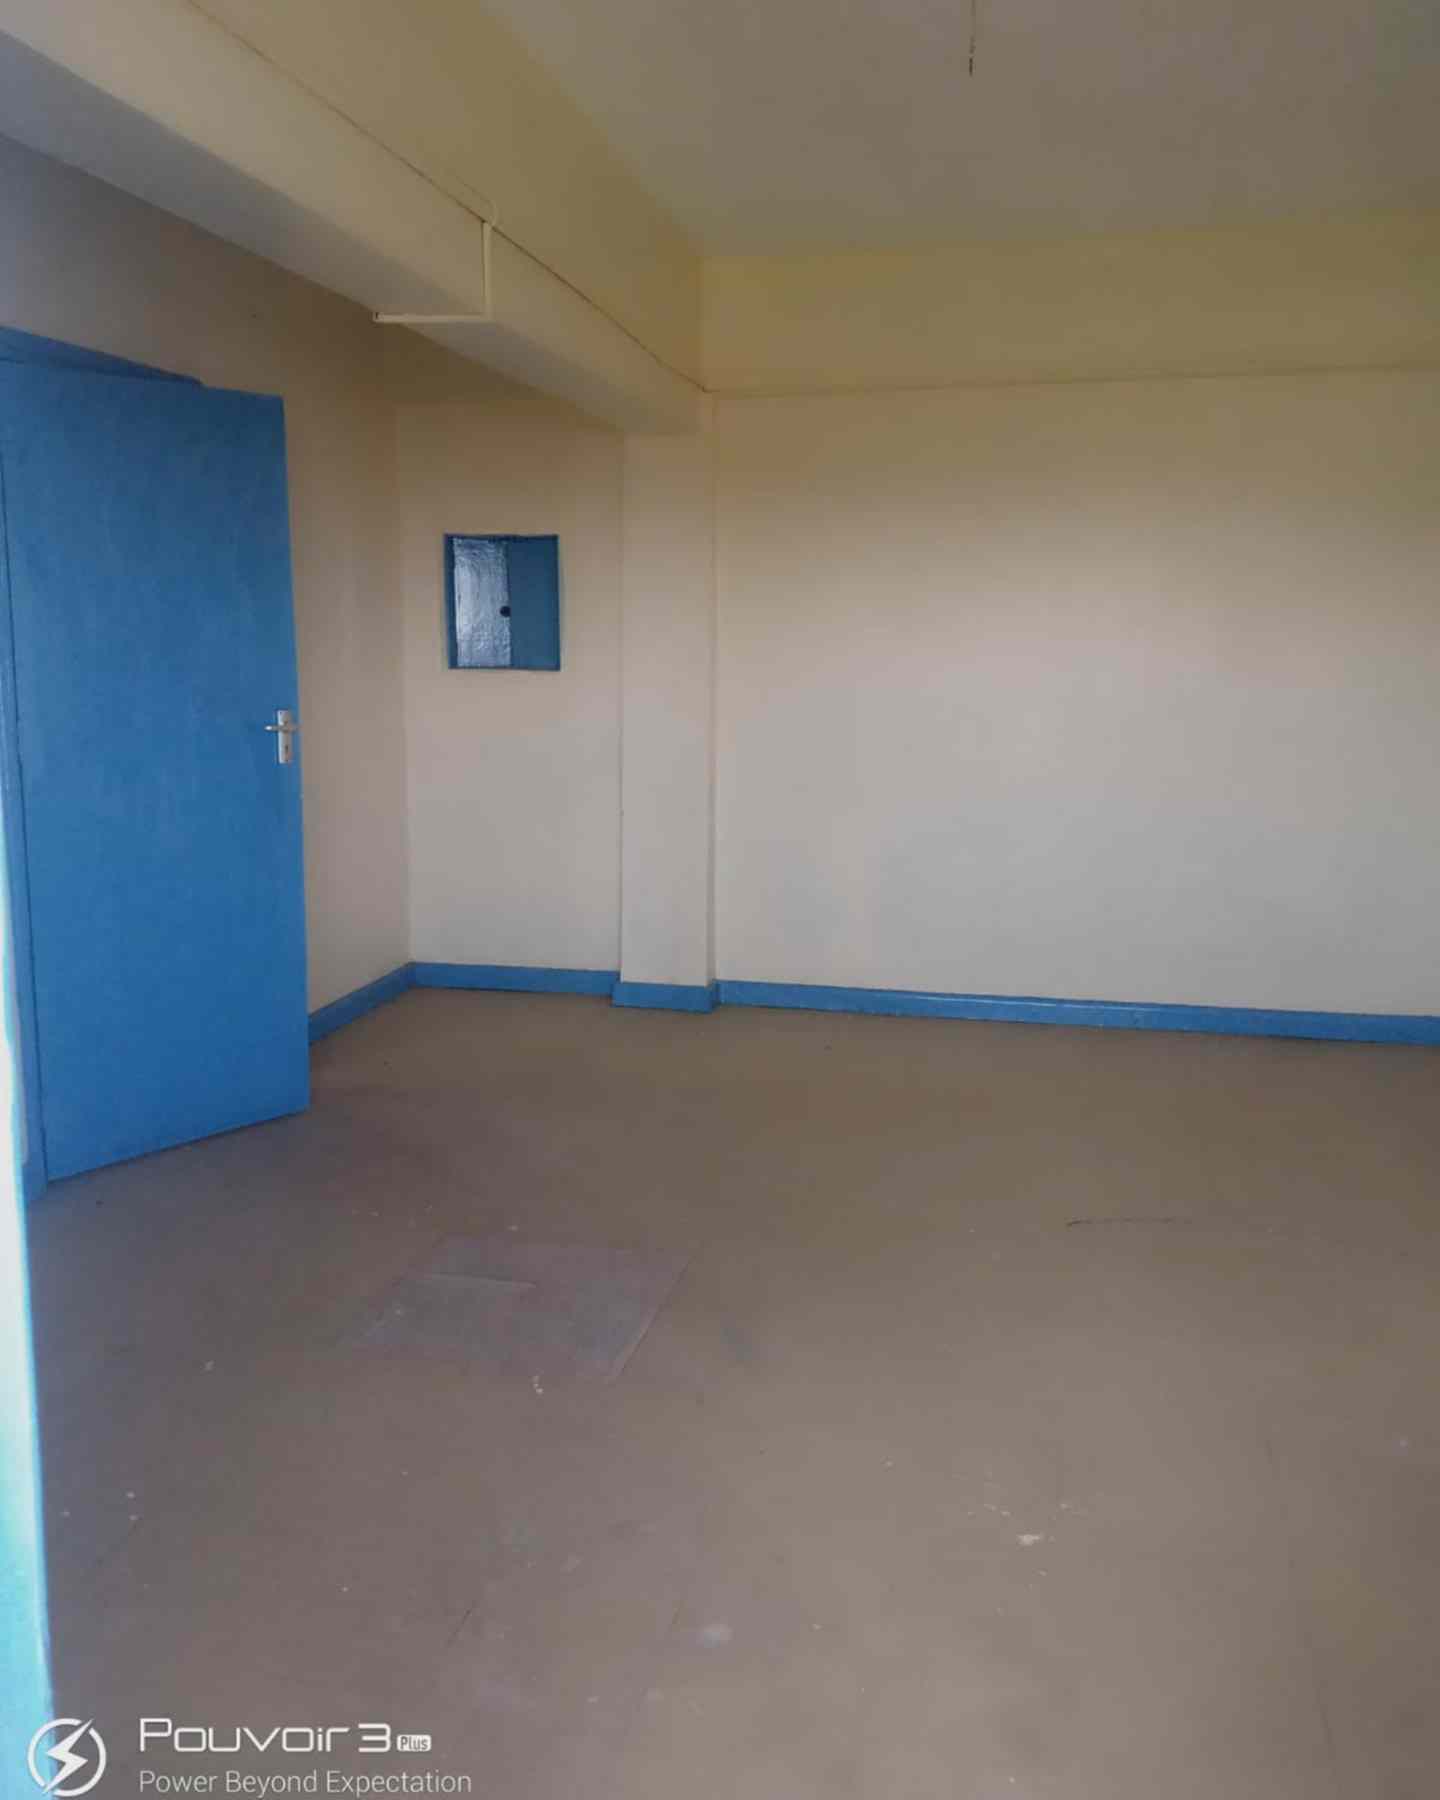 2 bedroom apartment for rent in Donholm